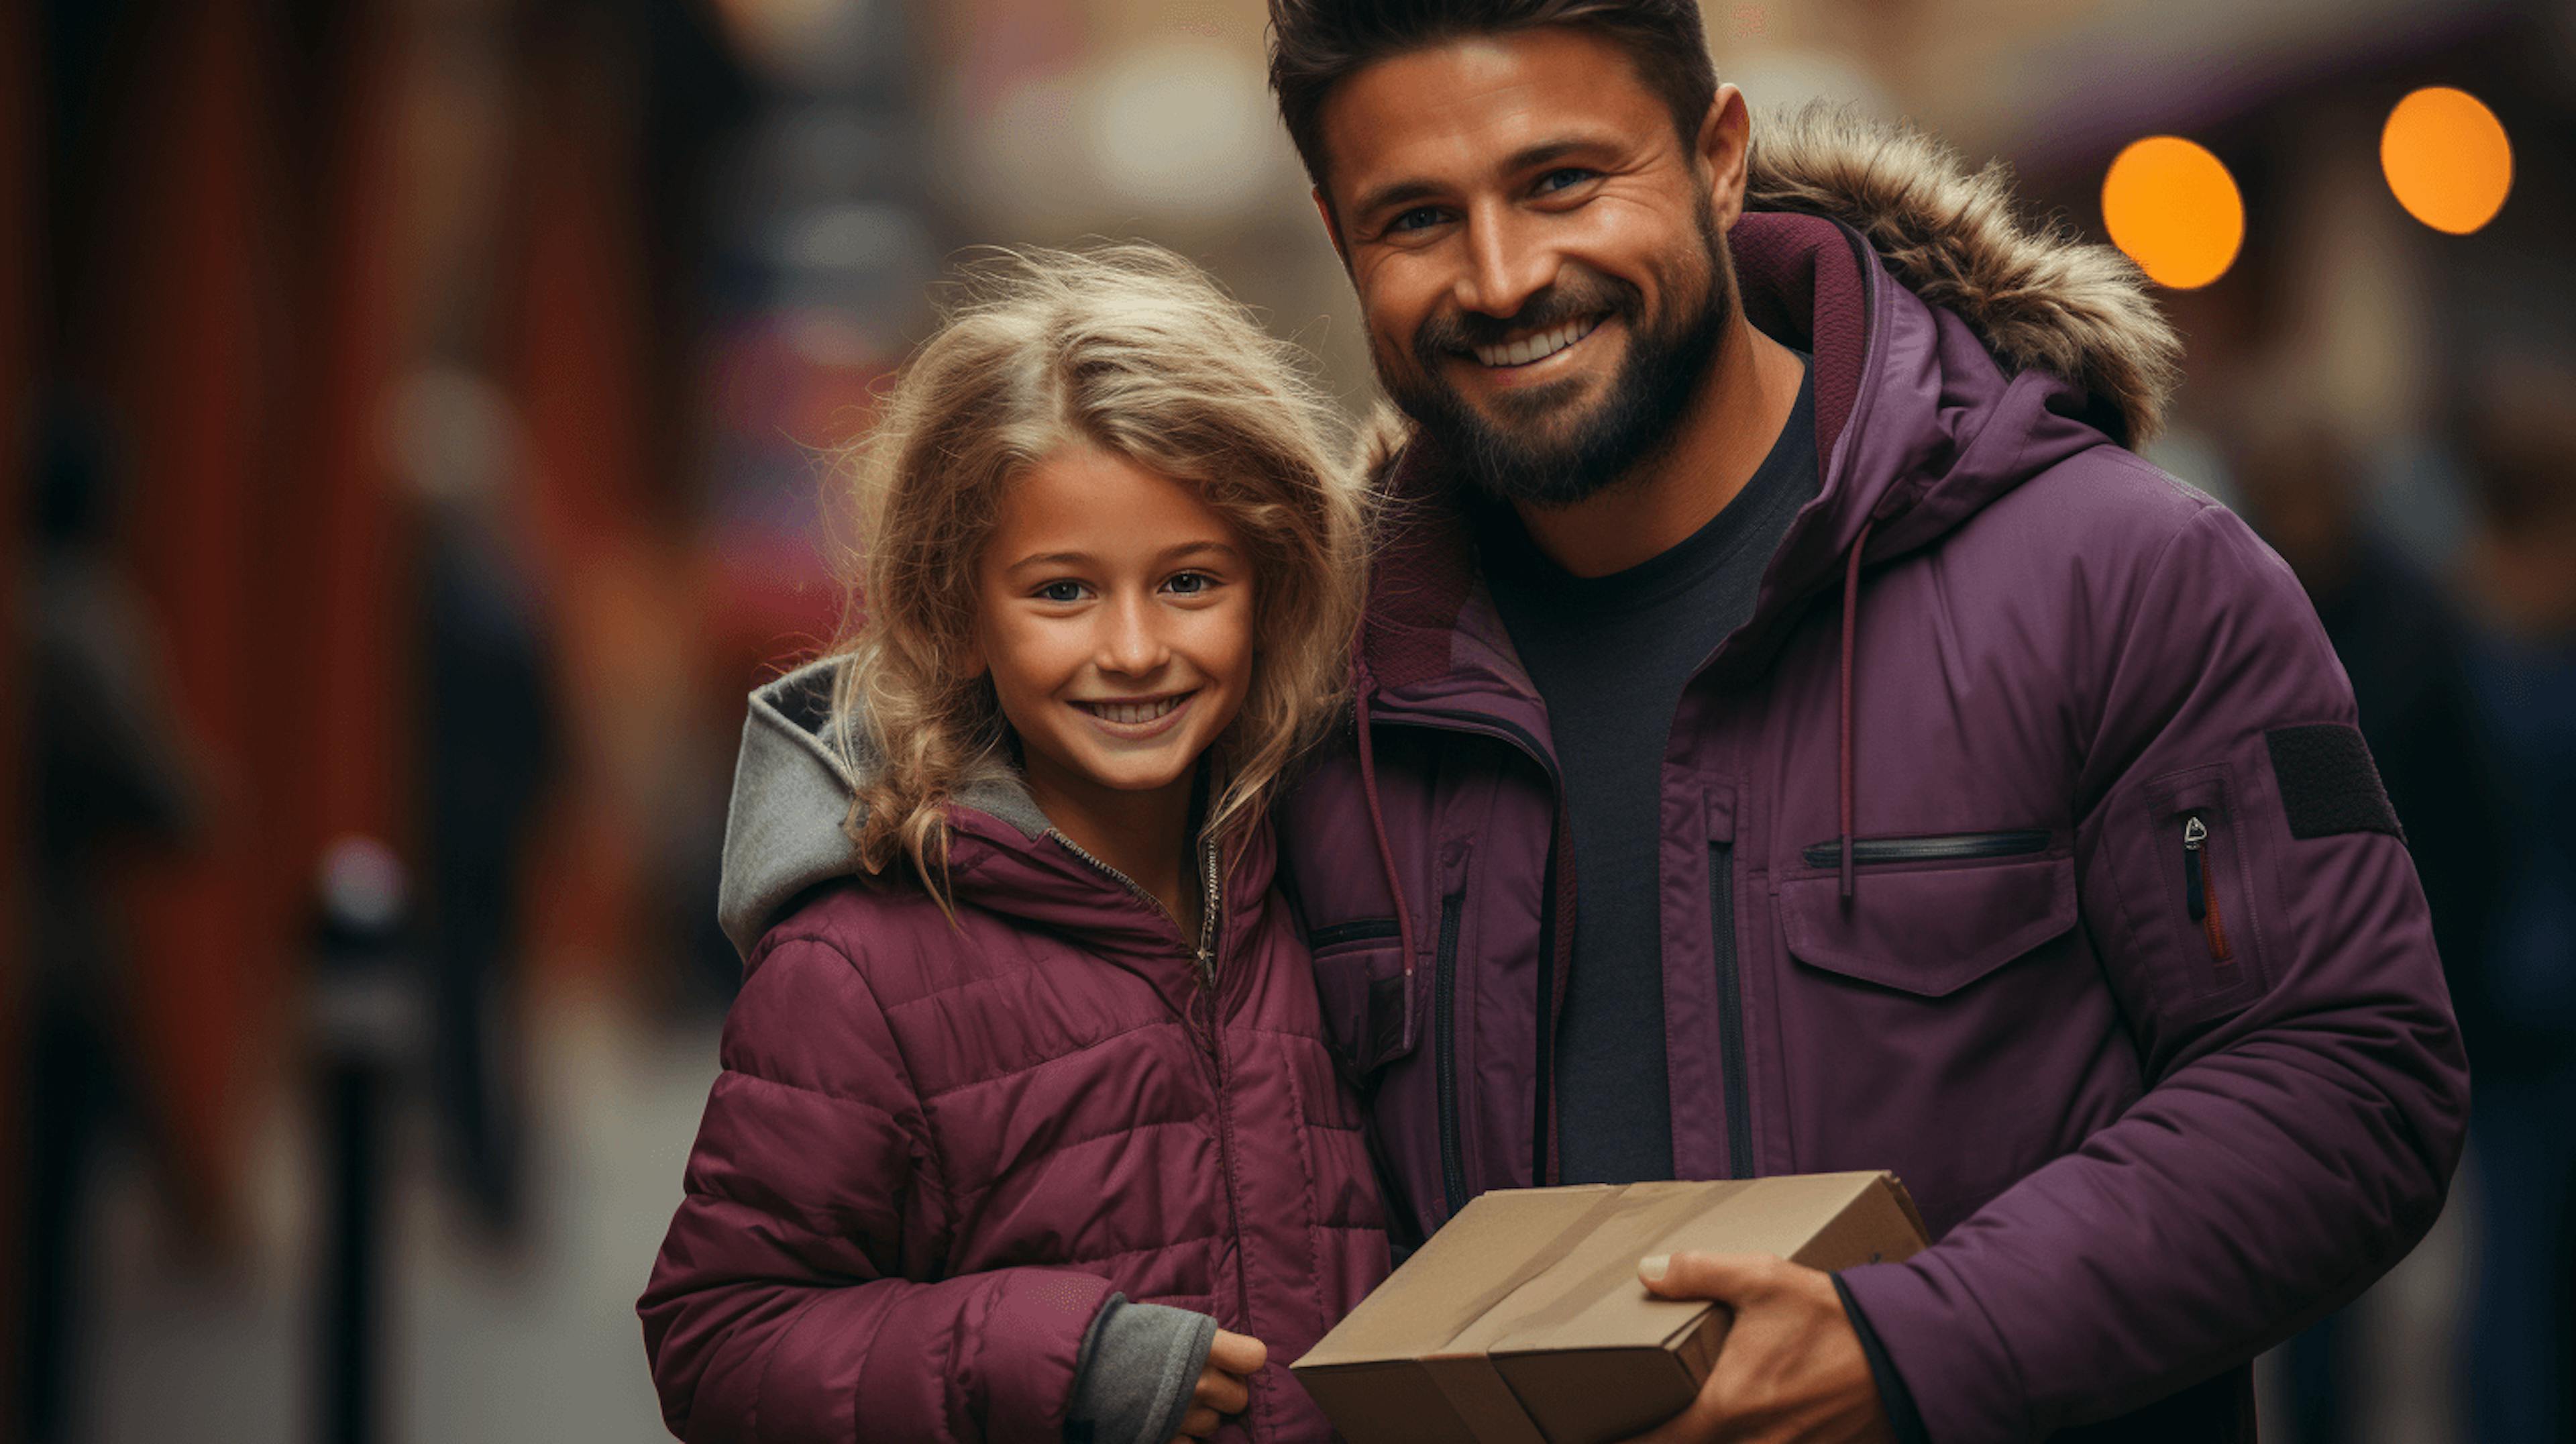 dad stands holding a gift box with a young girl in the street, in the style of dark purple and dark gray